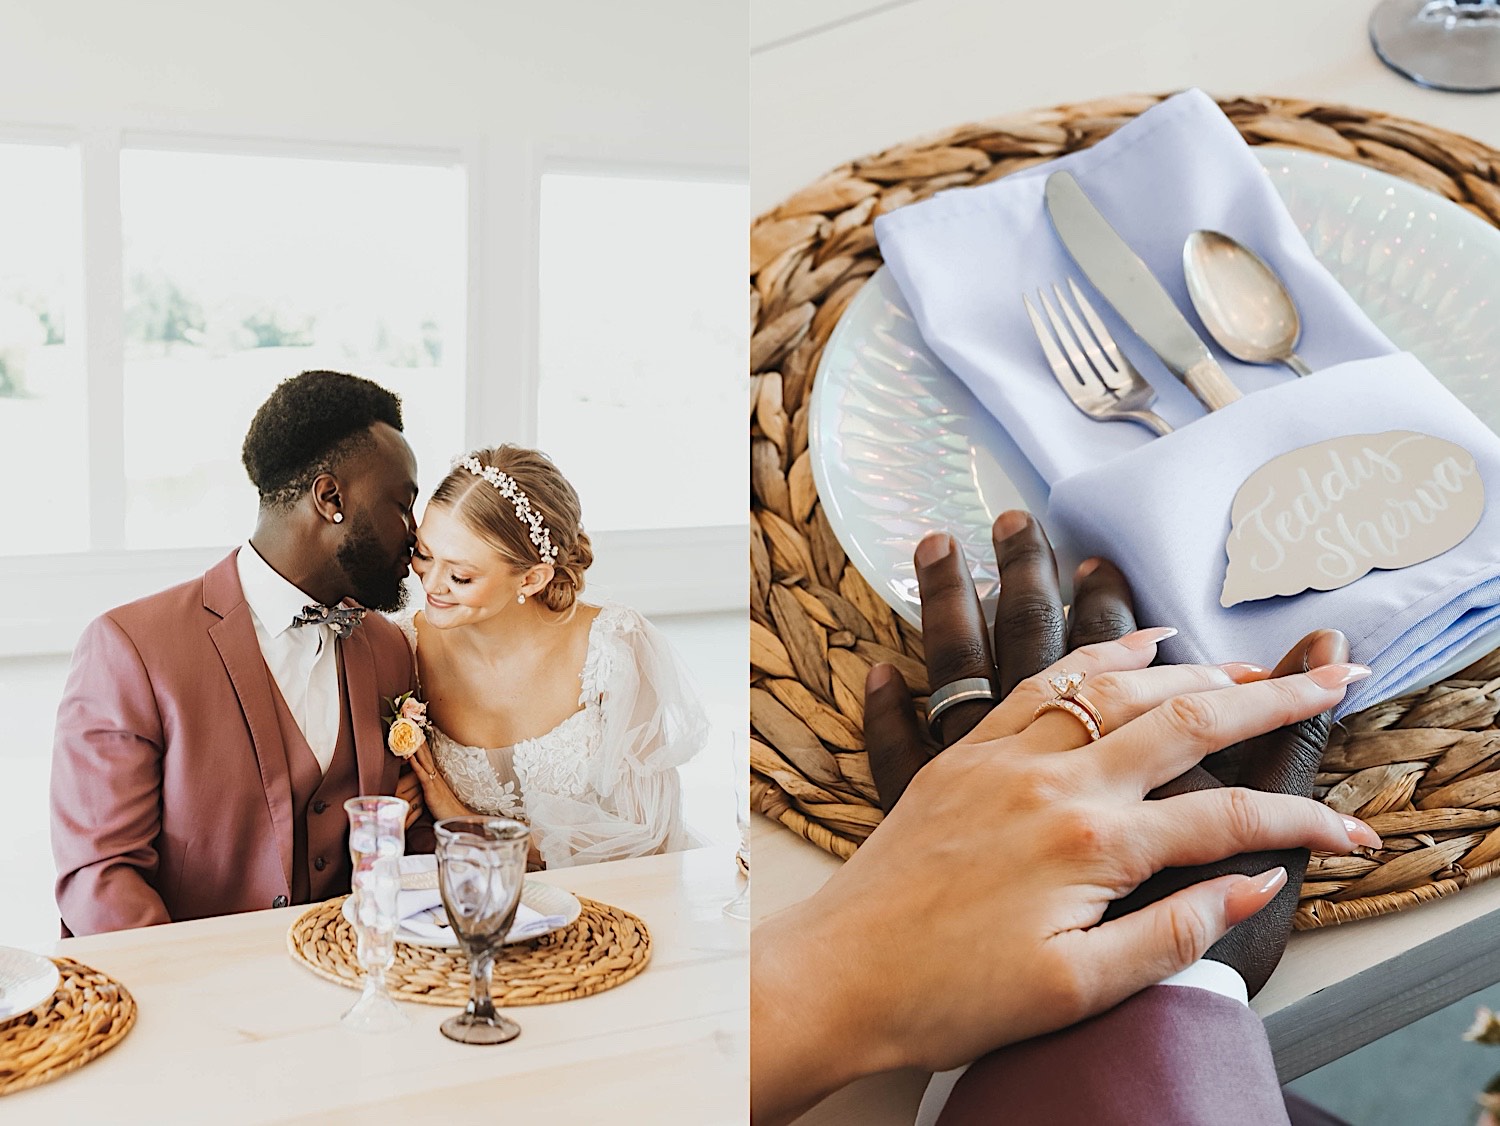 2 photos side by side, the left is of a bride and groom at their table for their reception and the groom is about to kiss the bride's cheek, the right is a close up photo of their hands resting on one another on the table